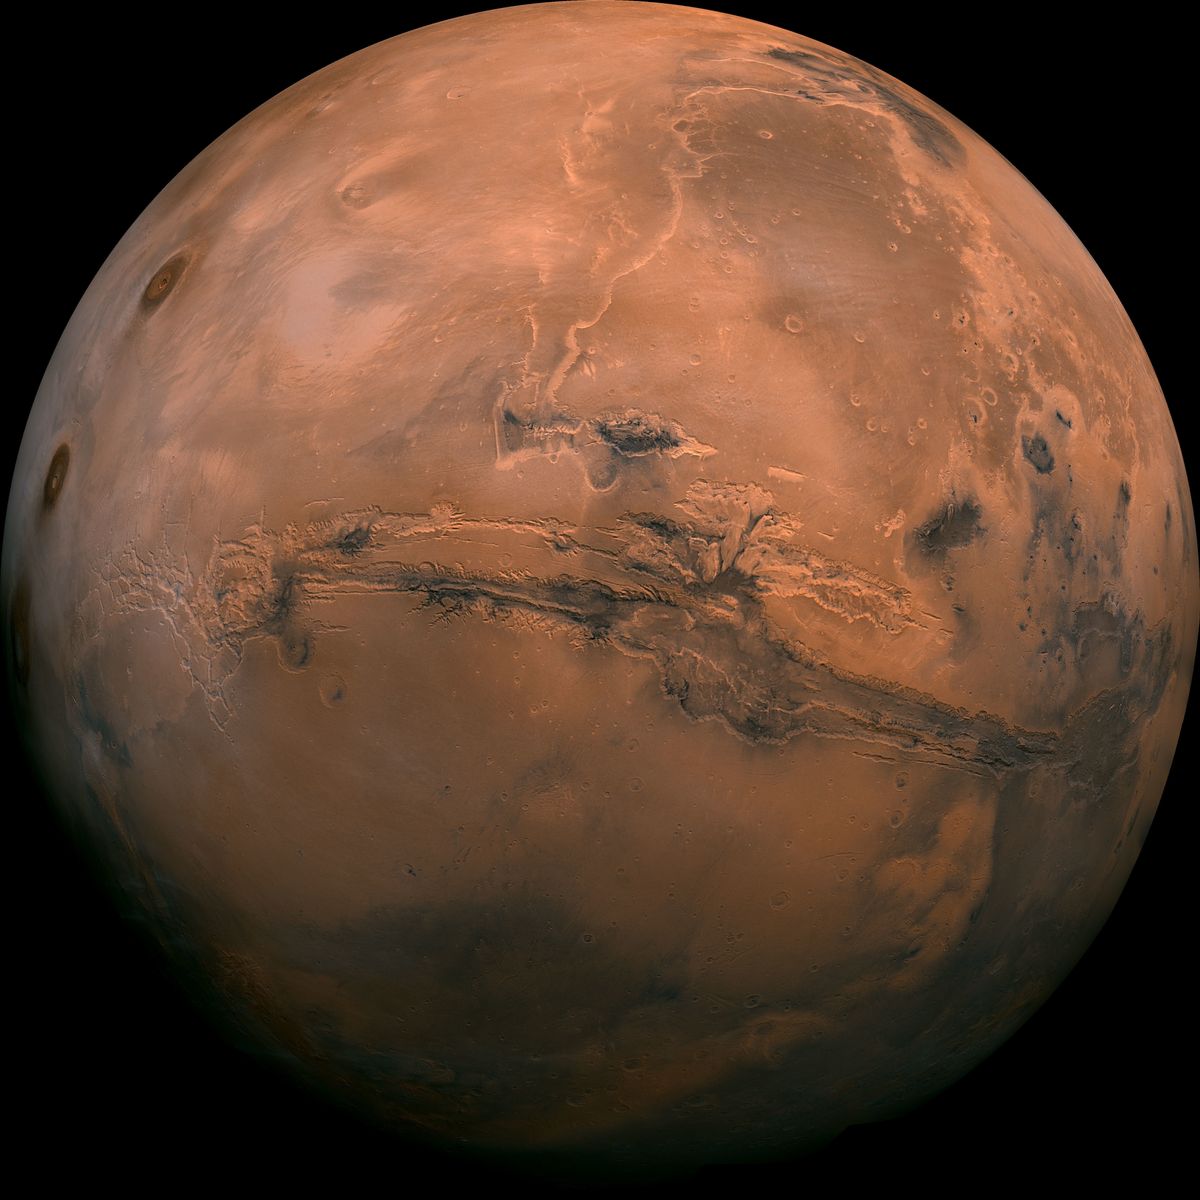 This image made available by NASA shows the planet Mars. This composite photo was created from over 100 images of Mars taken by Viking Orbiters in the 1970s. NASA is underestimating the amount of time and money it will take to bring Mars rocks back to Earth in the coming decade, an independent panel said Tuesday, Nov. 10, 2020.  (HOGP)